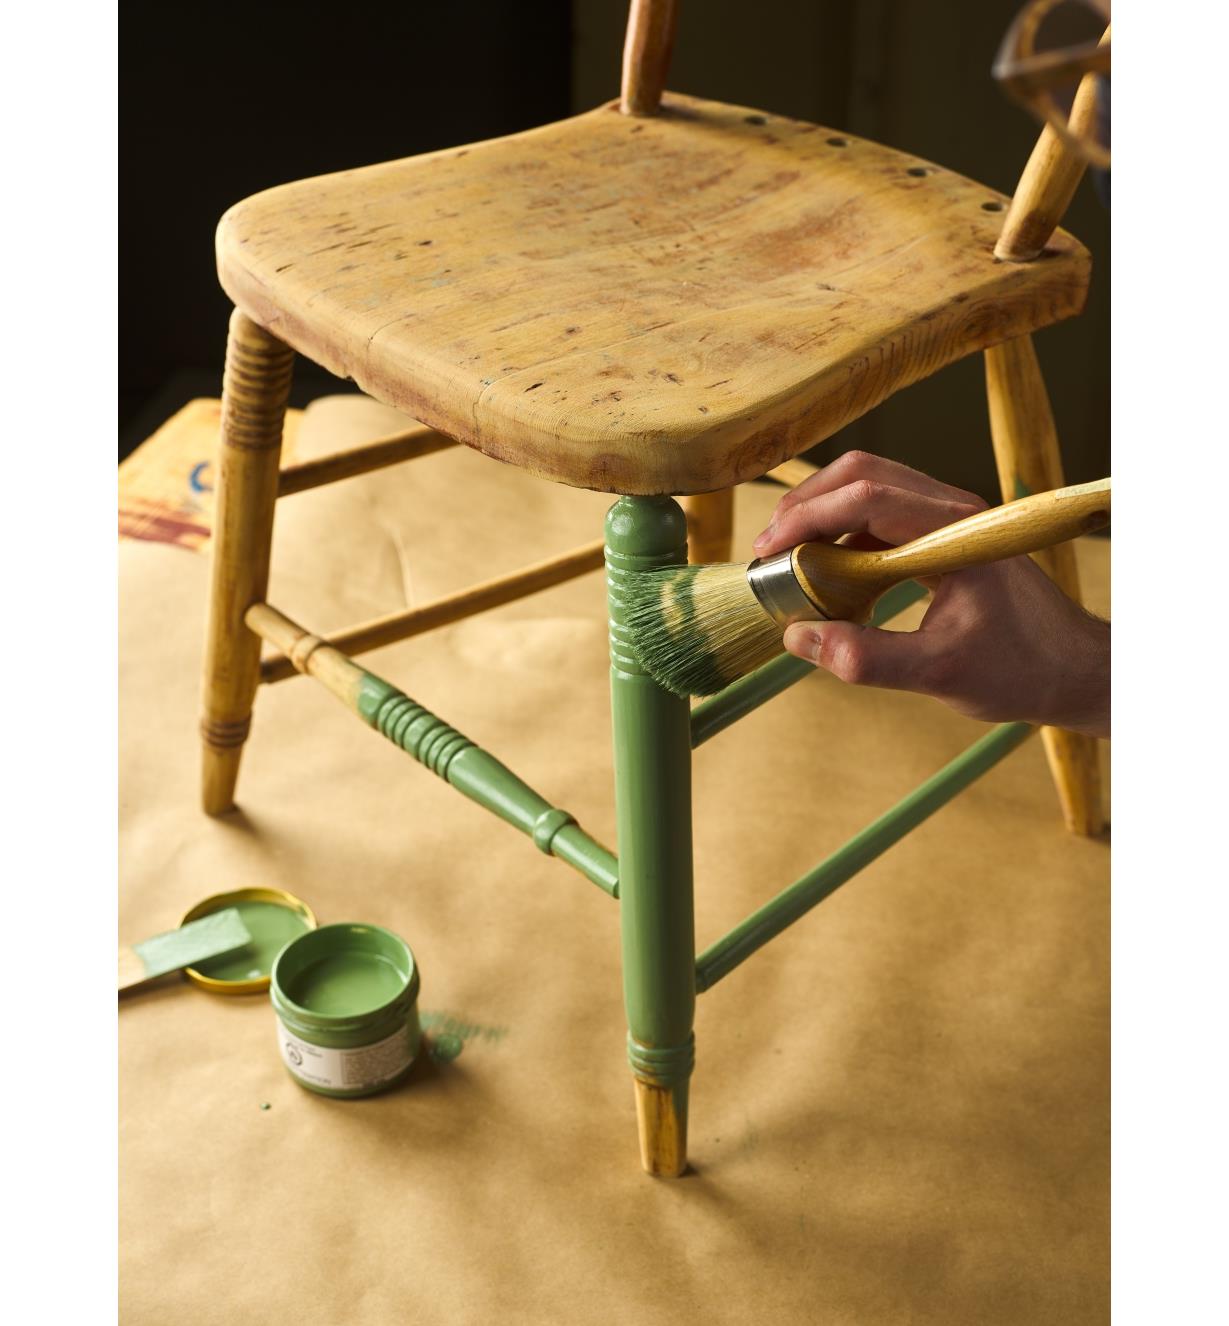 Using a brush to apply Allback linseed oil paint to a wooden chair